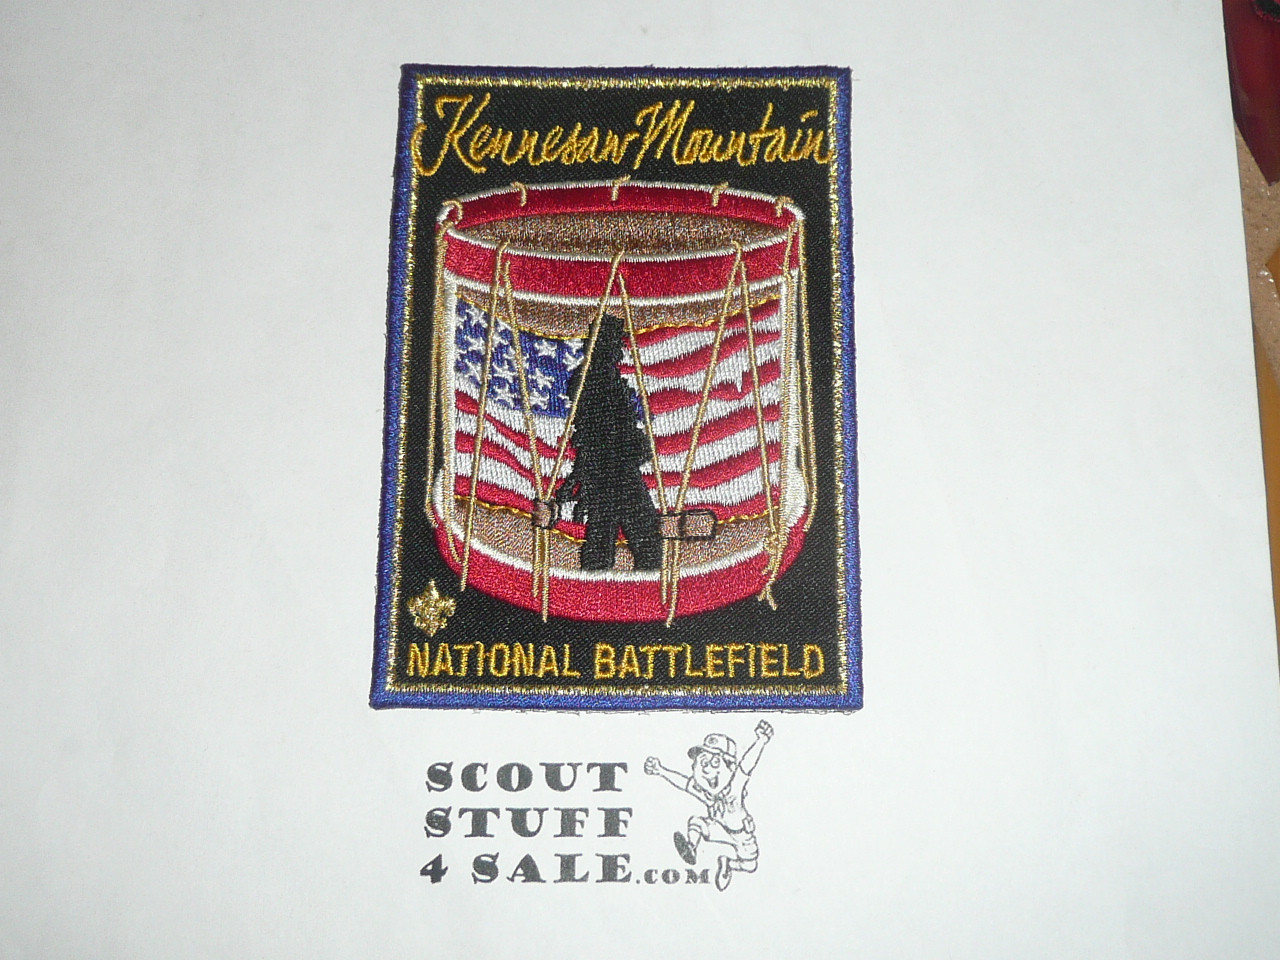 Kennesaw Mountain National Battlefield Trail Patch, Issued by the Boy Scouts of America